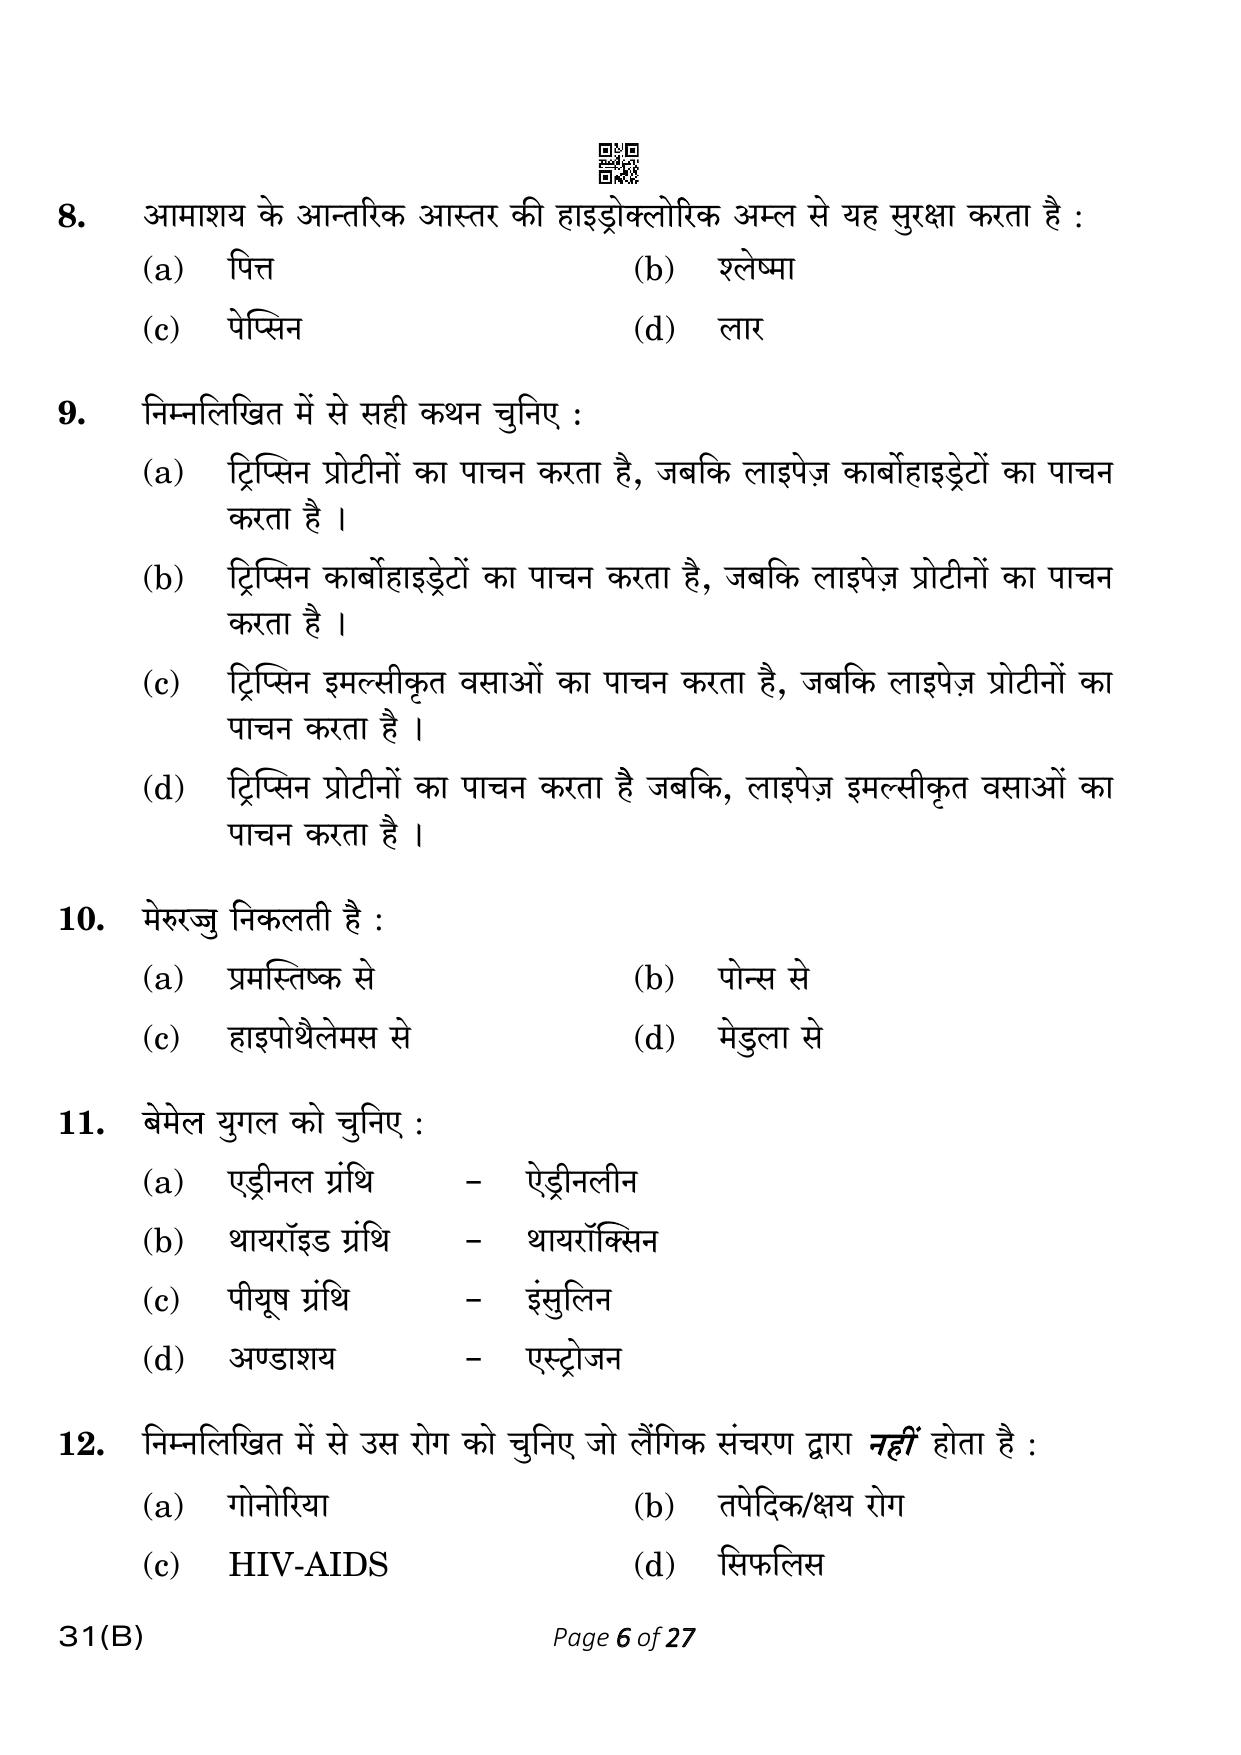 CBSE Class 10 31-B Science 2023 (Compartment) Question Paper - Page 6